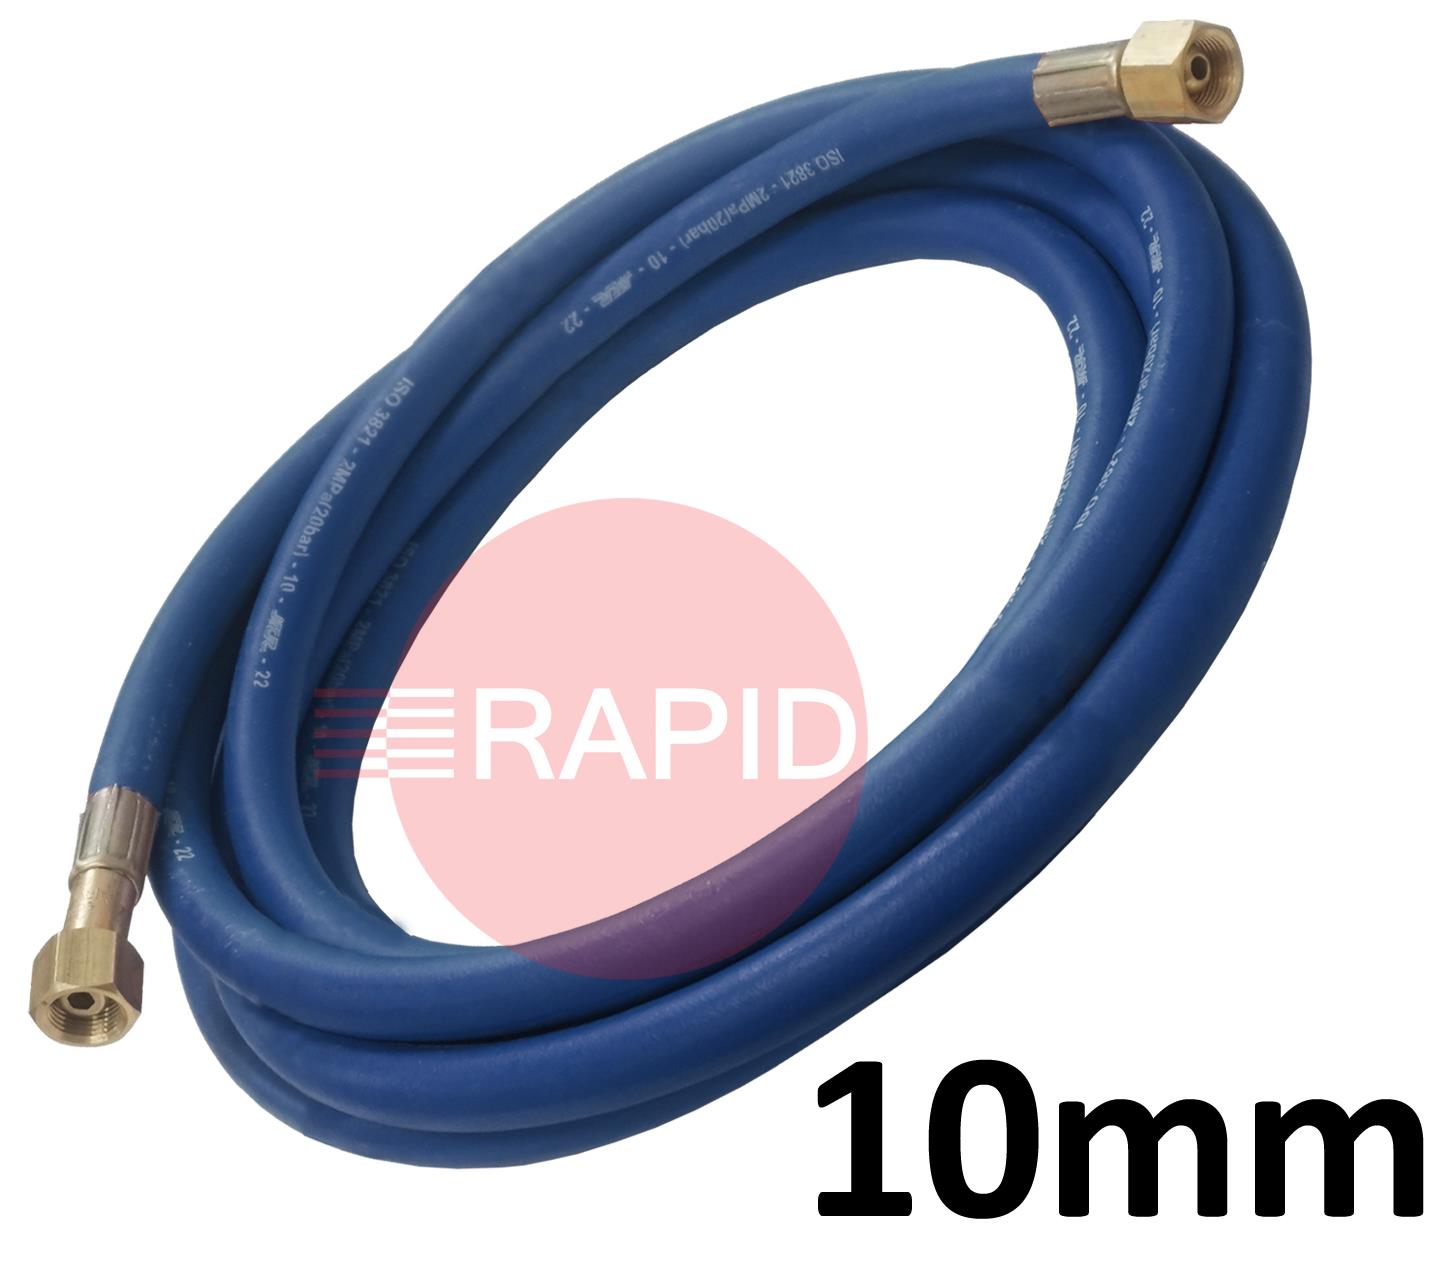 A5118  Fitted Oxygen Hose. 10mm Bore. G3/8 Check Valve & G3/8 Regulator Connection - 10m